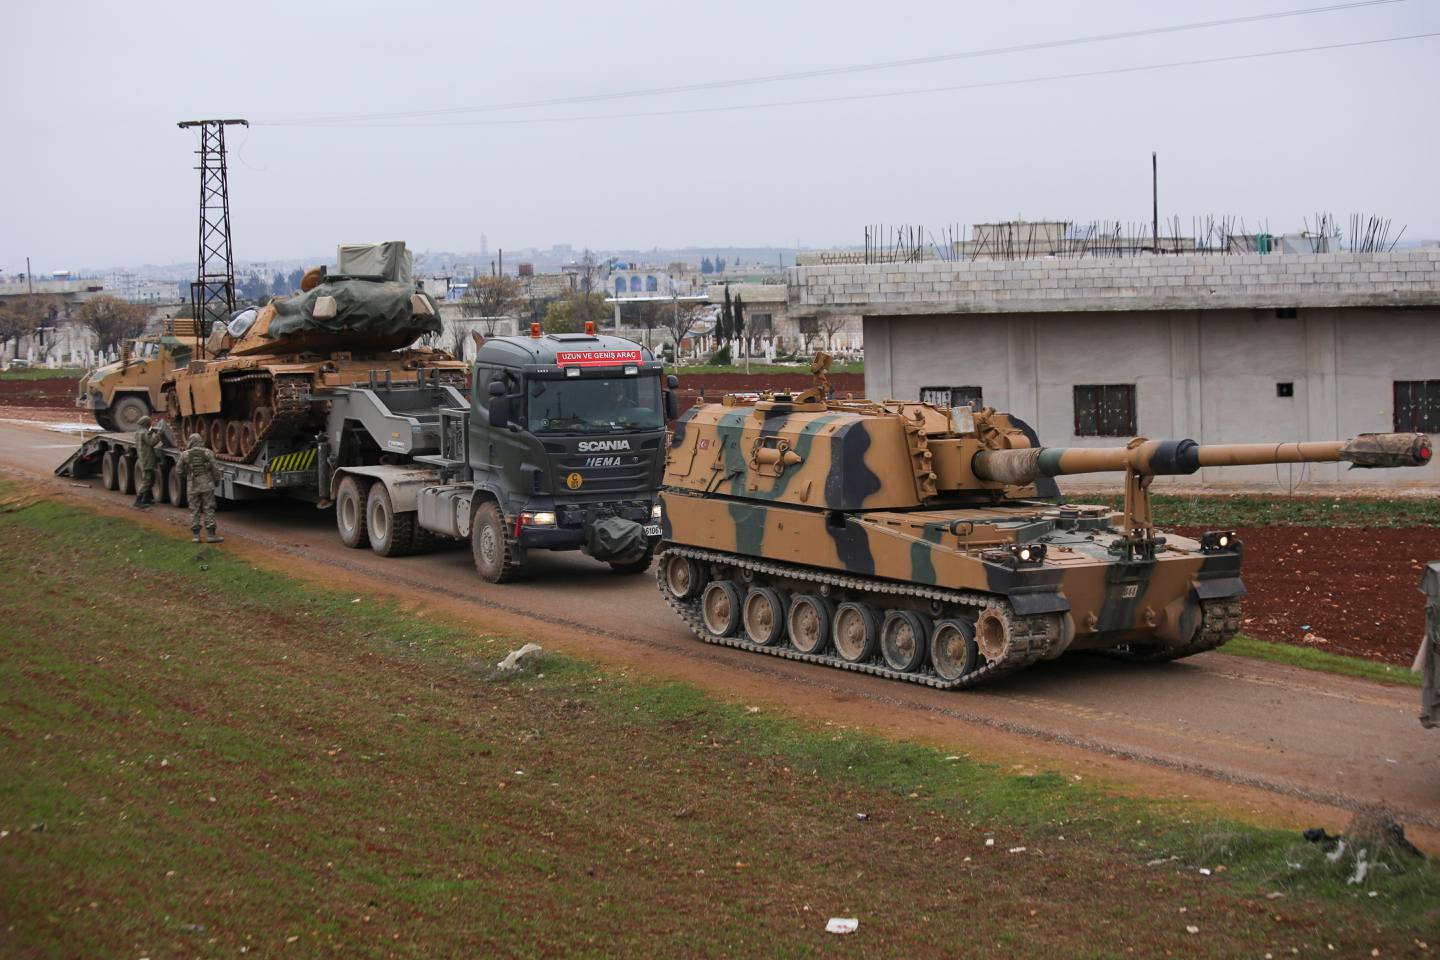 Turkish military convoy is seen near the town of Idlib, Syria, Wednesday, Feb. 12, 2020. Turkish President Recep Tayyip Erdogan said Wednesday that Turkey will attack government forces anywhere in Syria if another Turkish soldier is injured. (AP Photo/Ghaith Alsayed)